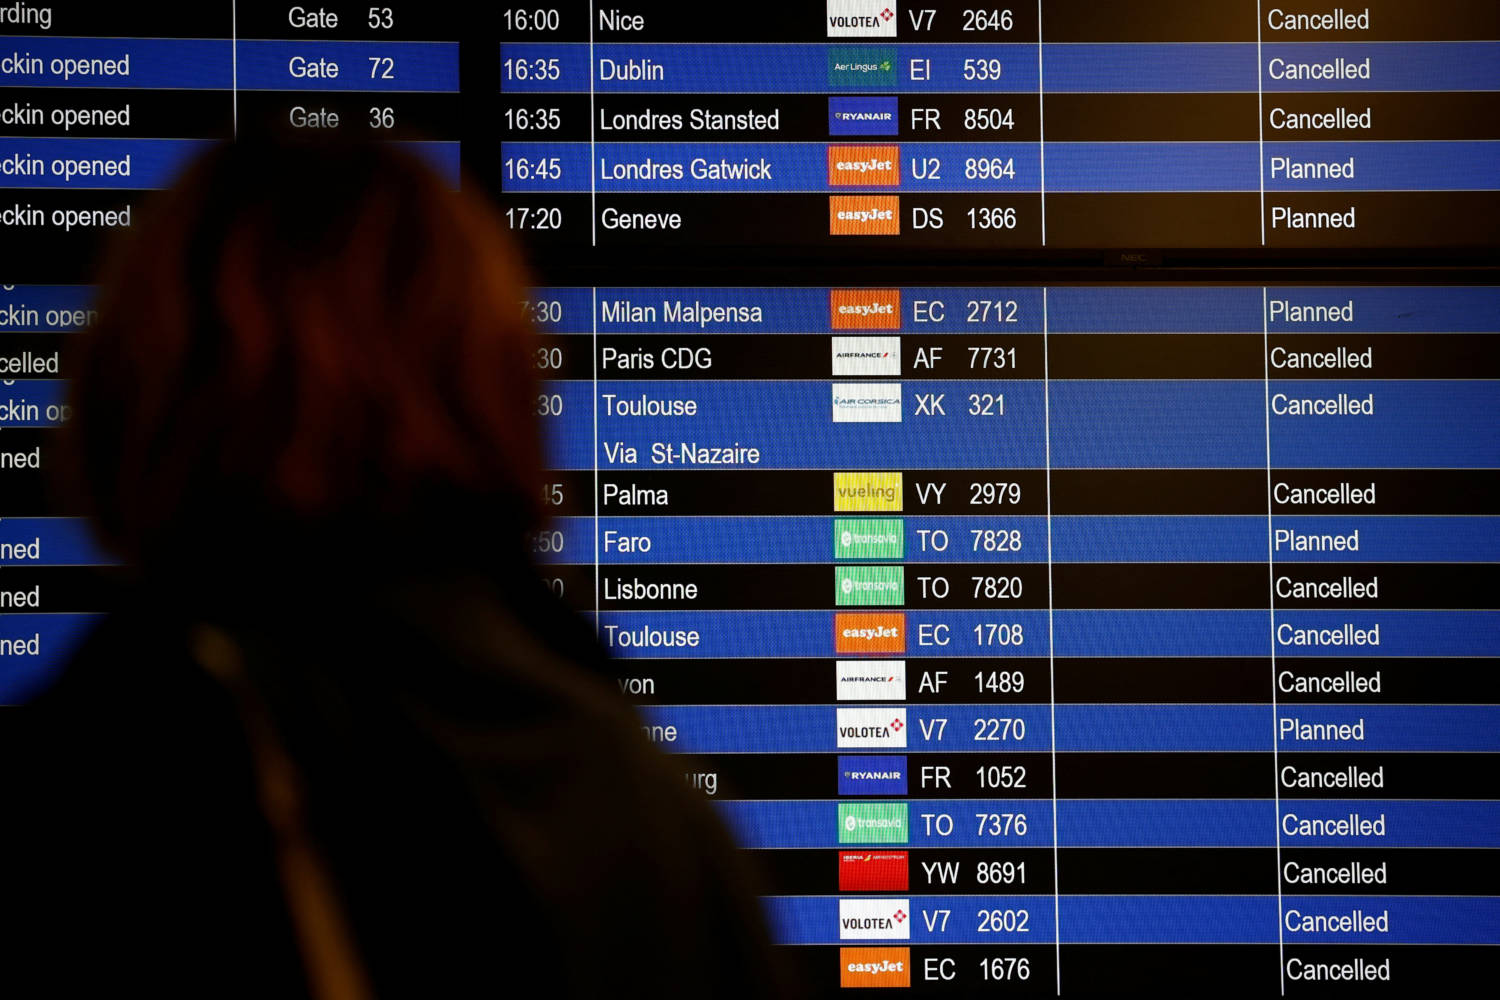 European flights disrupted by French air traffic control strike in